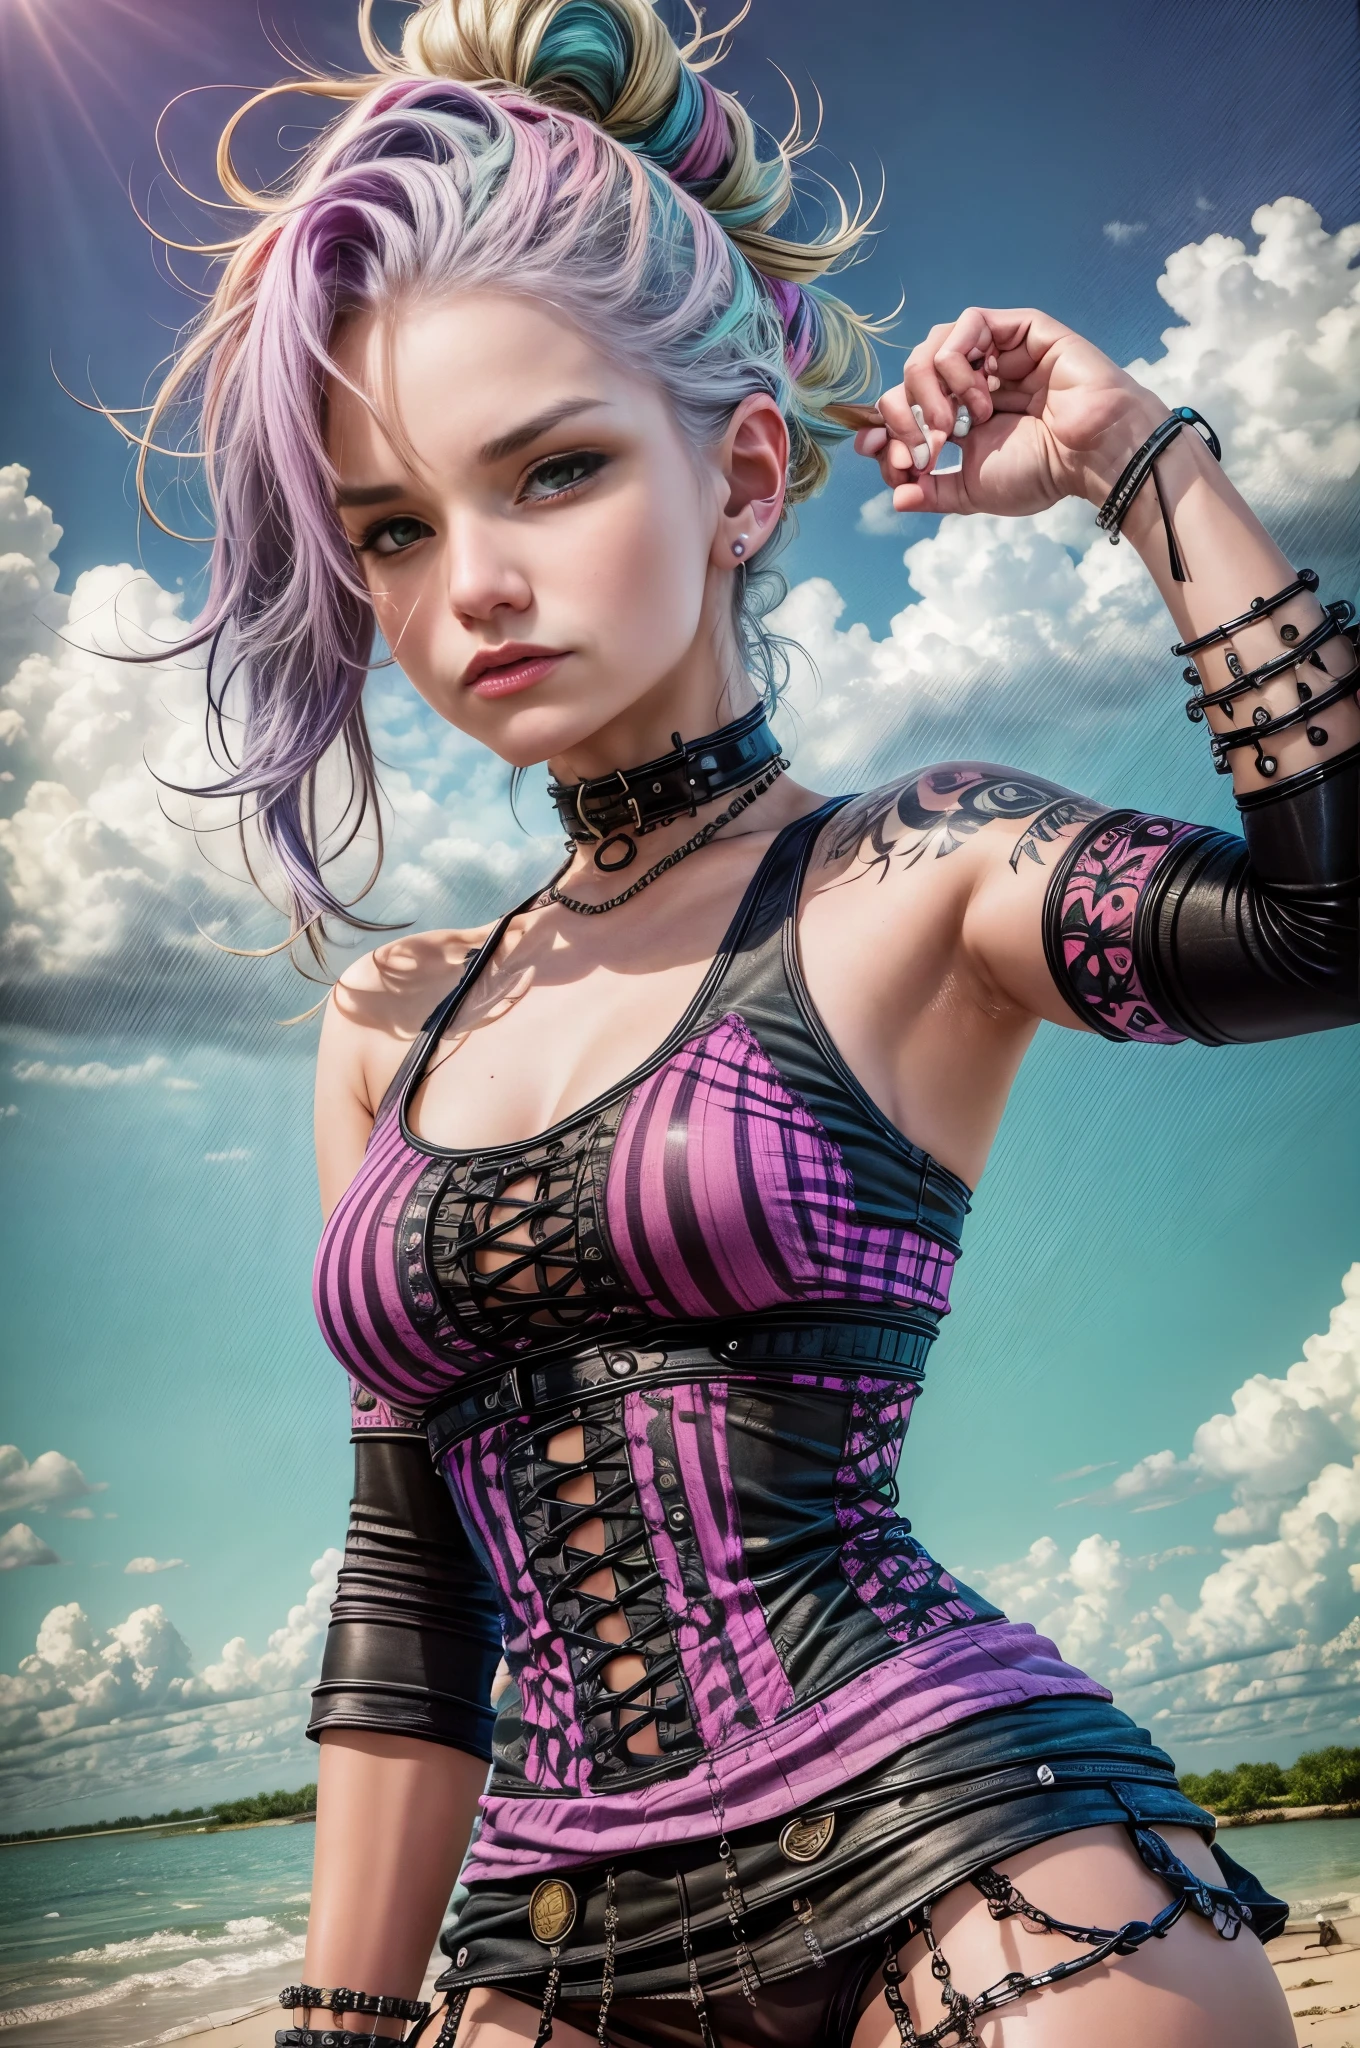 Best quality, photorealistic, 8k, masterpiece, A woman with a tattoo on her arm, tattoo sleeve on her right arm and neck, tattoos and piercings, beautiful female punk,pink and purple hair, choker, heavy bracelets, pastel clothes, florida, miniskirt, pink tank top, bright sunny day, feral grin, heavily saturated photo, in the bayou, everglades, dirty and grimy